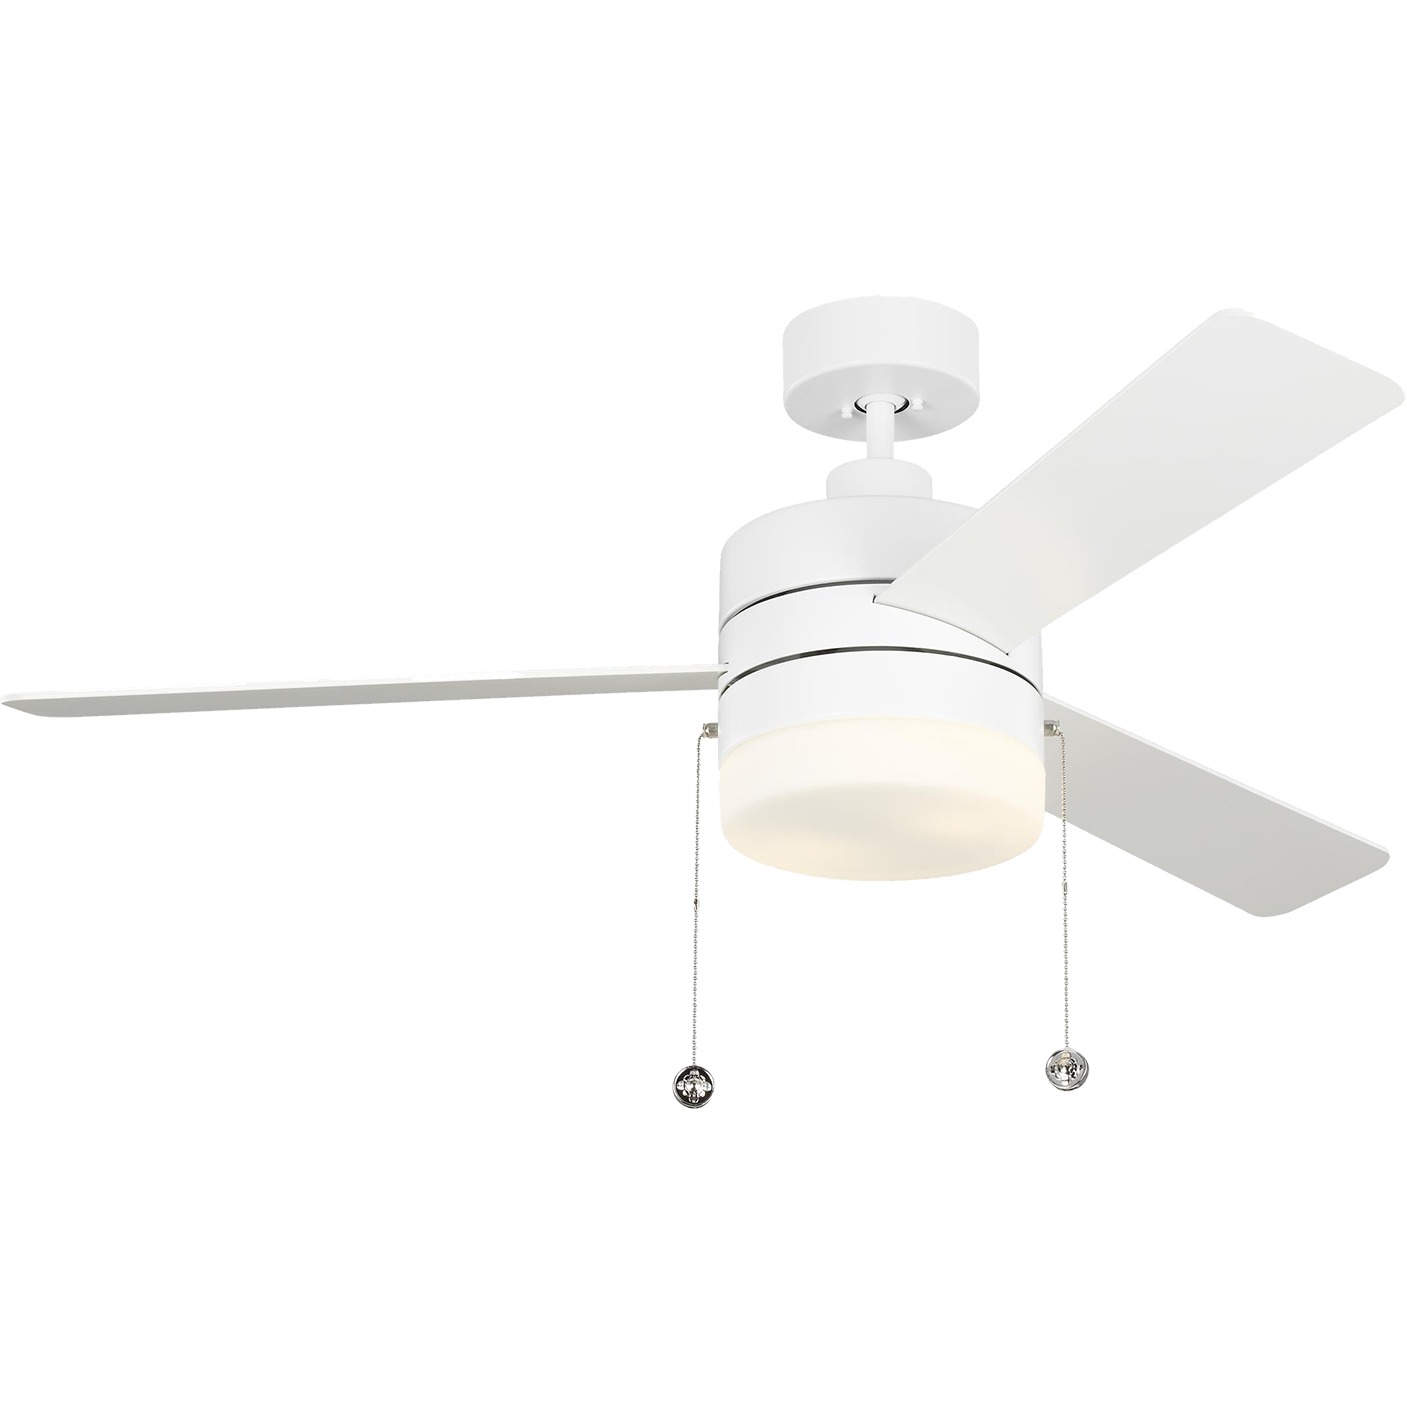 Syrus 52" LED Ceiling Fan